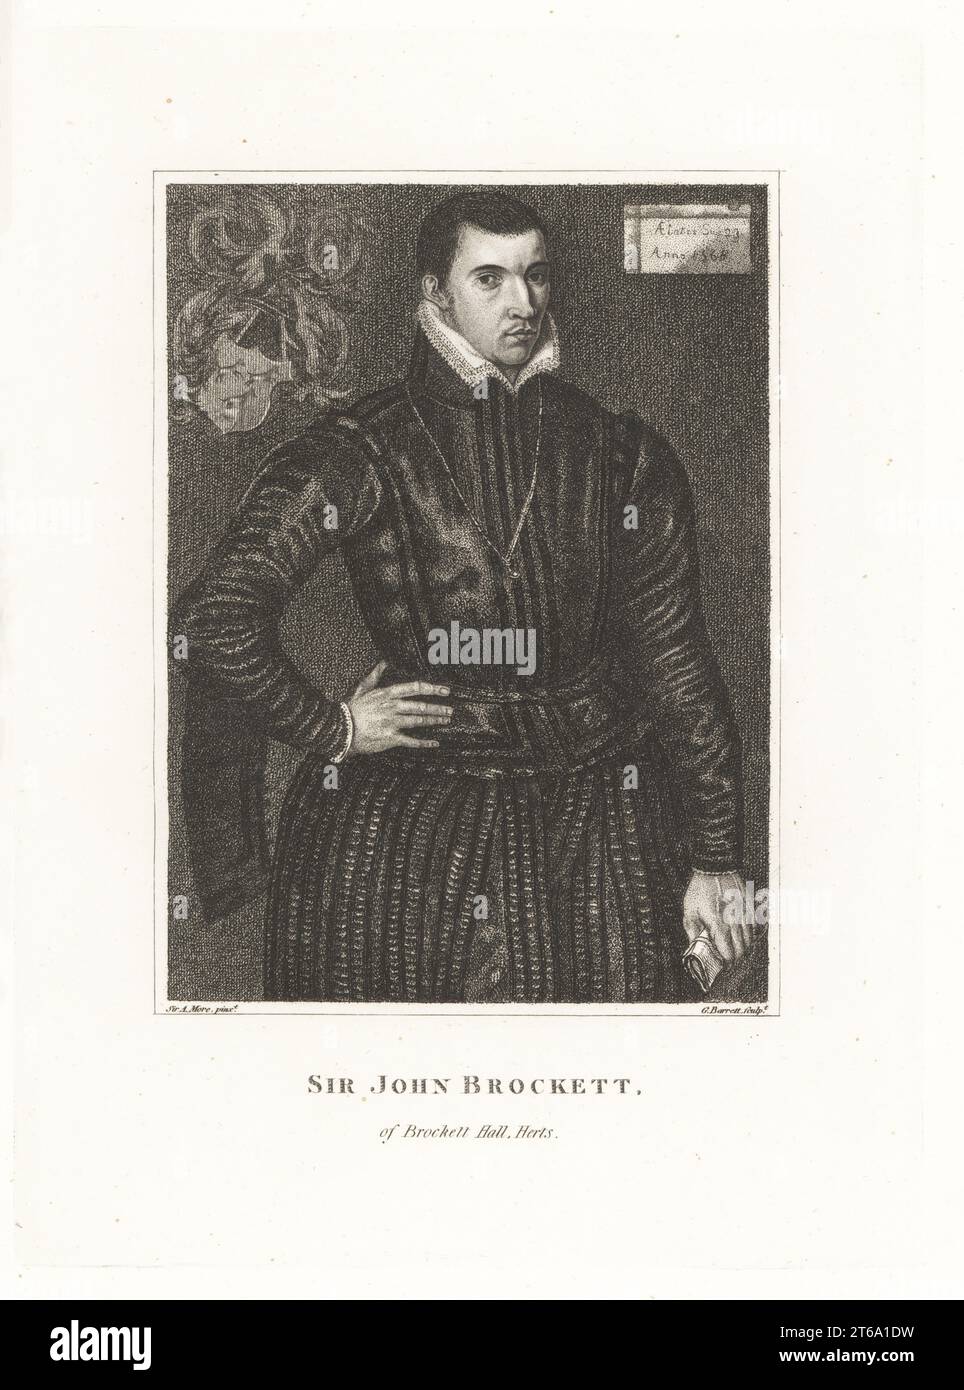 Sir John Brocket, 1540-1598, English noble, captain of Queen Elizabeth I's personal guard. Sir John Brockett, Brockett Hall, Herts. In lace collar, quilted doublet and hose, coat of arms behind him. Copperplate engraving by G. Barrett after a painting by Sir Anthony More dated 1568 from Samuel Woodburns Gallery of Rare Portraits Consisting of Original Plates, George Jones, 102 St Martins Lane, London, 1816. Stock Photo